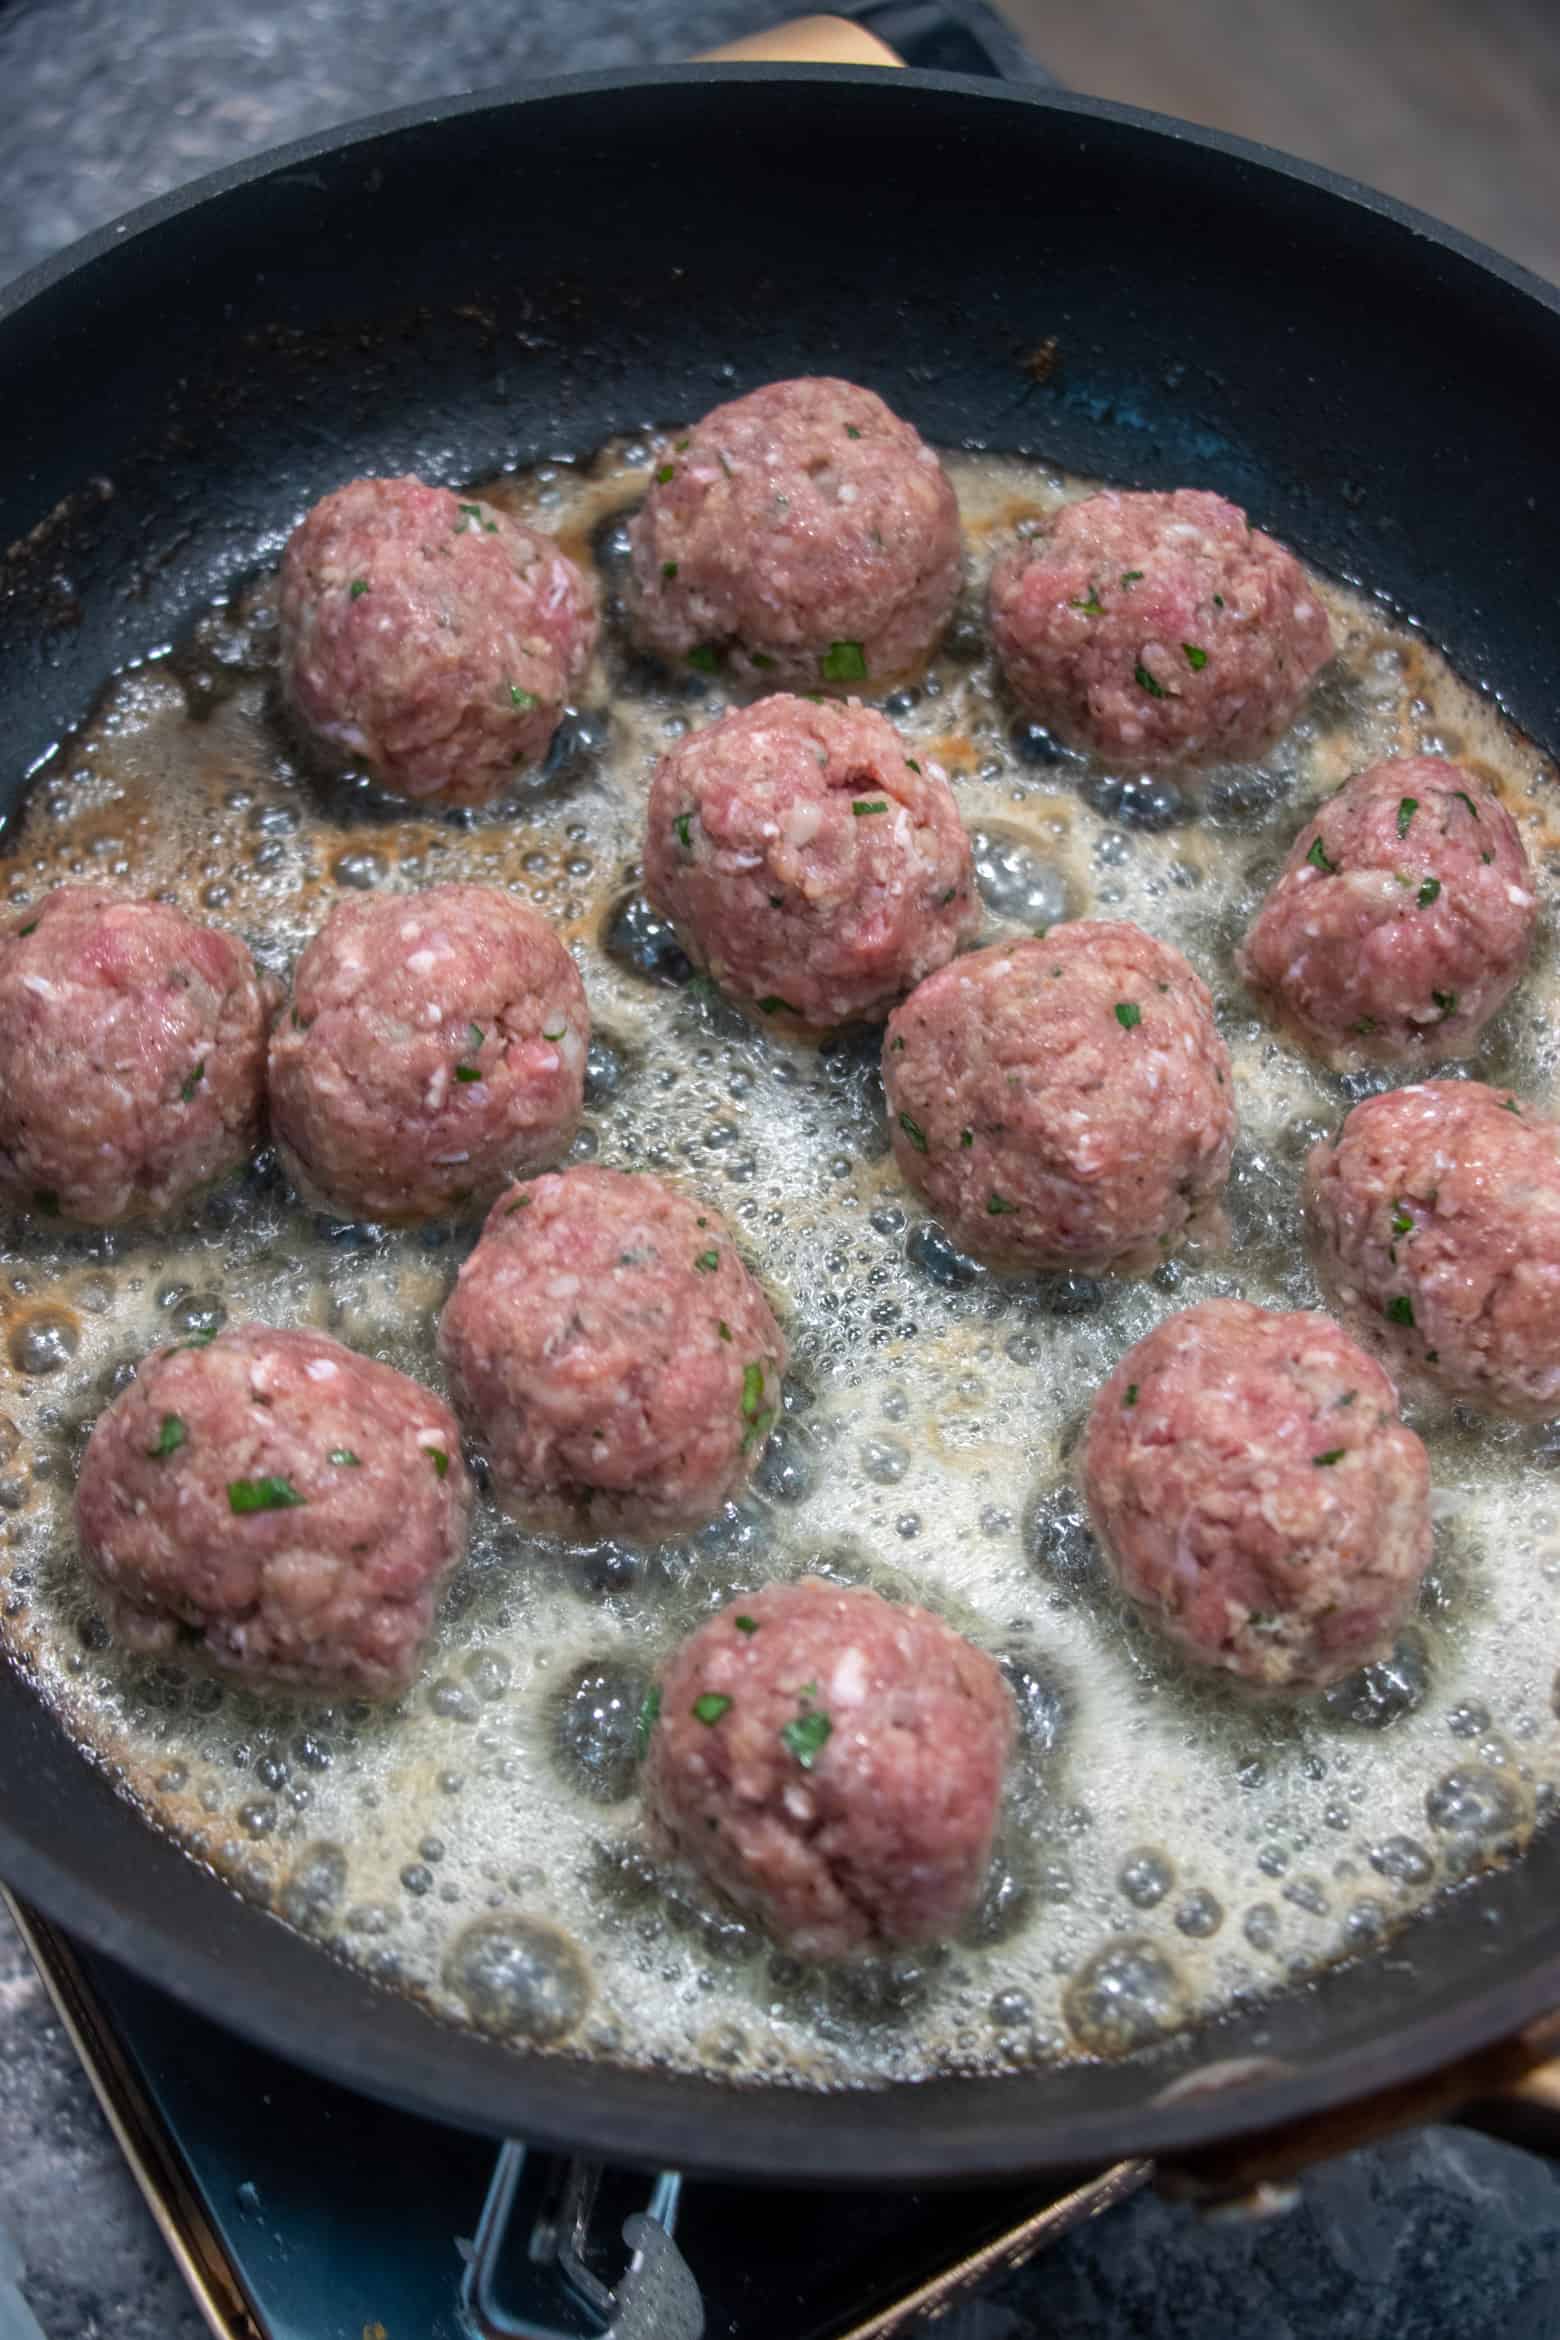 meatballs cooking in a skillet.